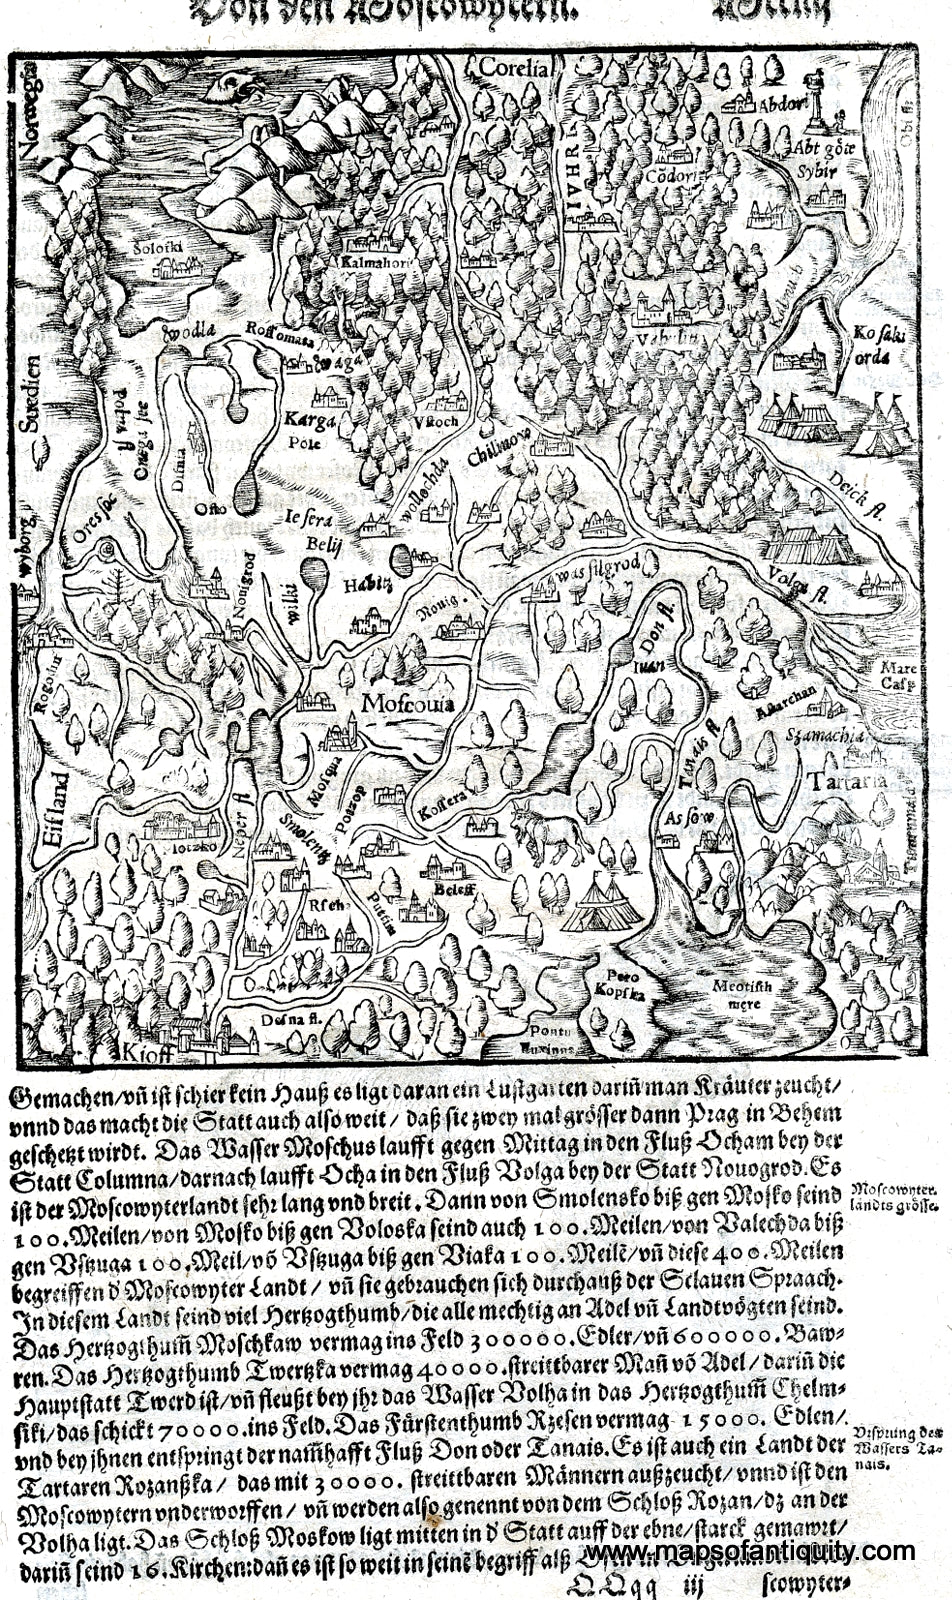 Black-and-White-Antique-Map-Russia**********--Europe-1590-Sebastian-Munster-Maps-Of-Antiquity